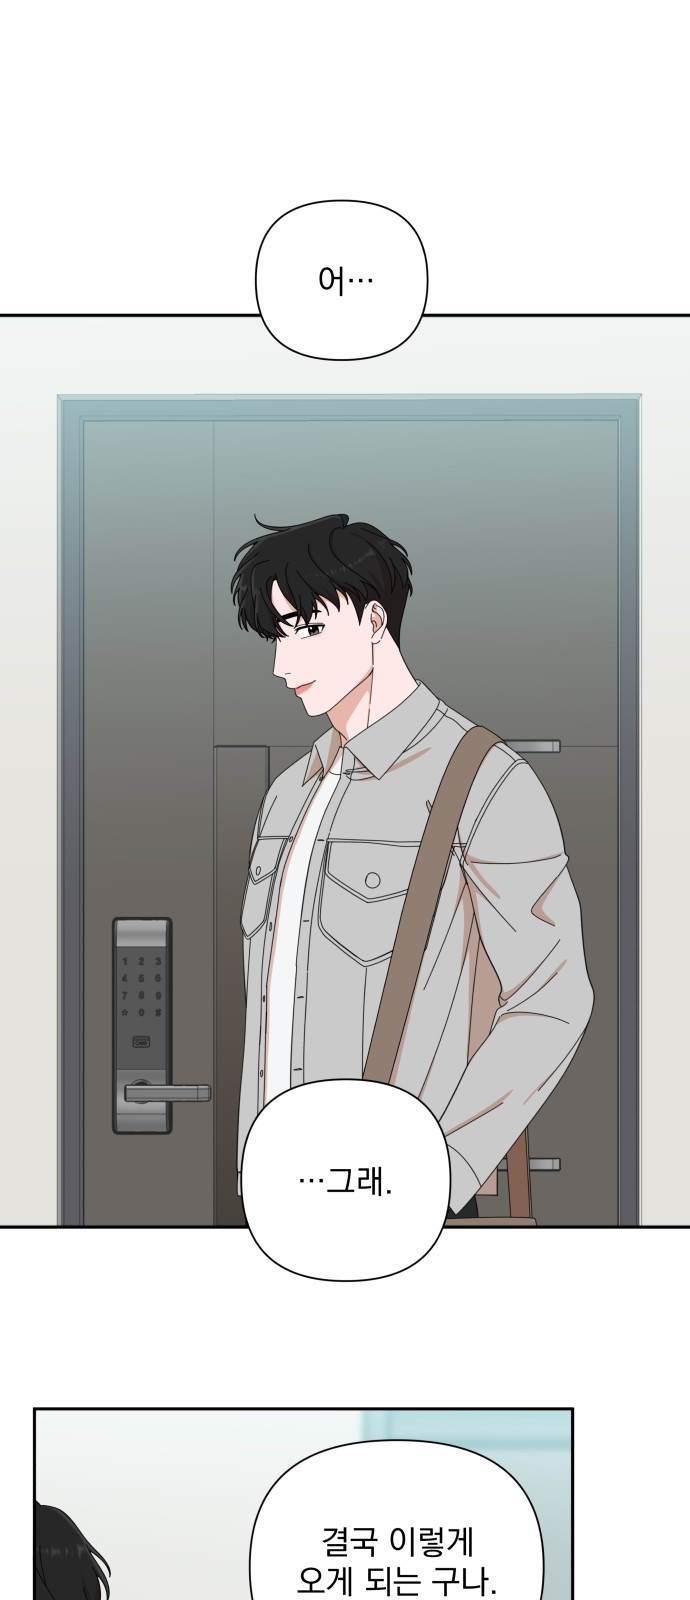 The Man With Pretty Lips - Chapter 4 - Page 68